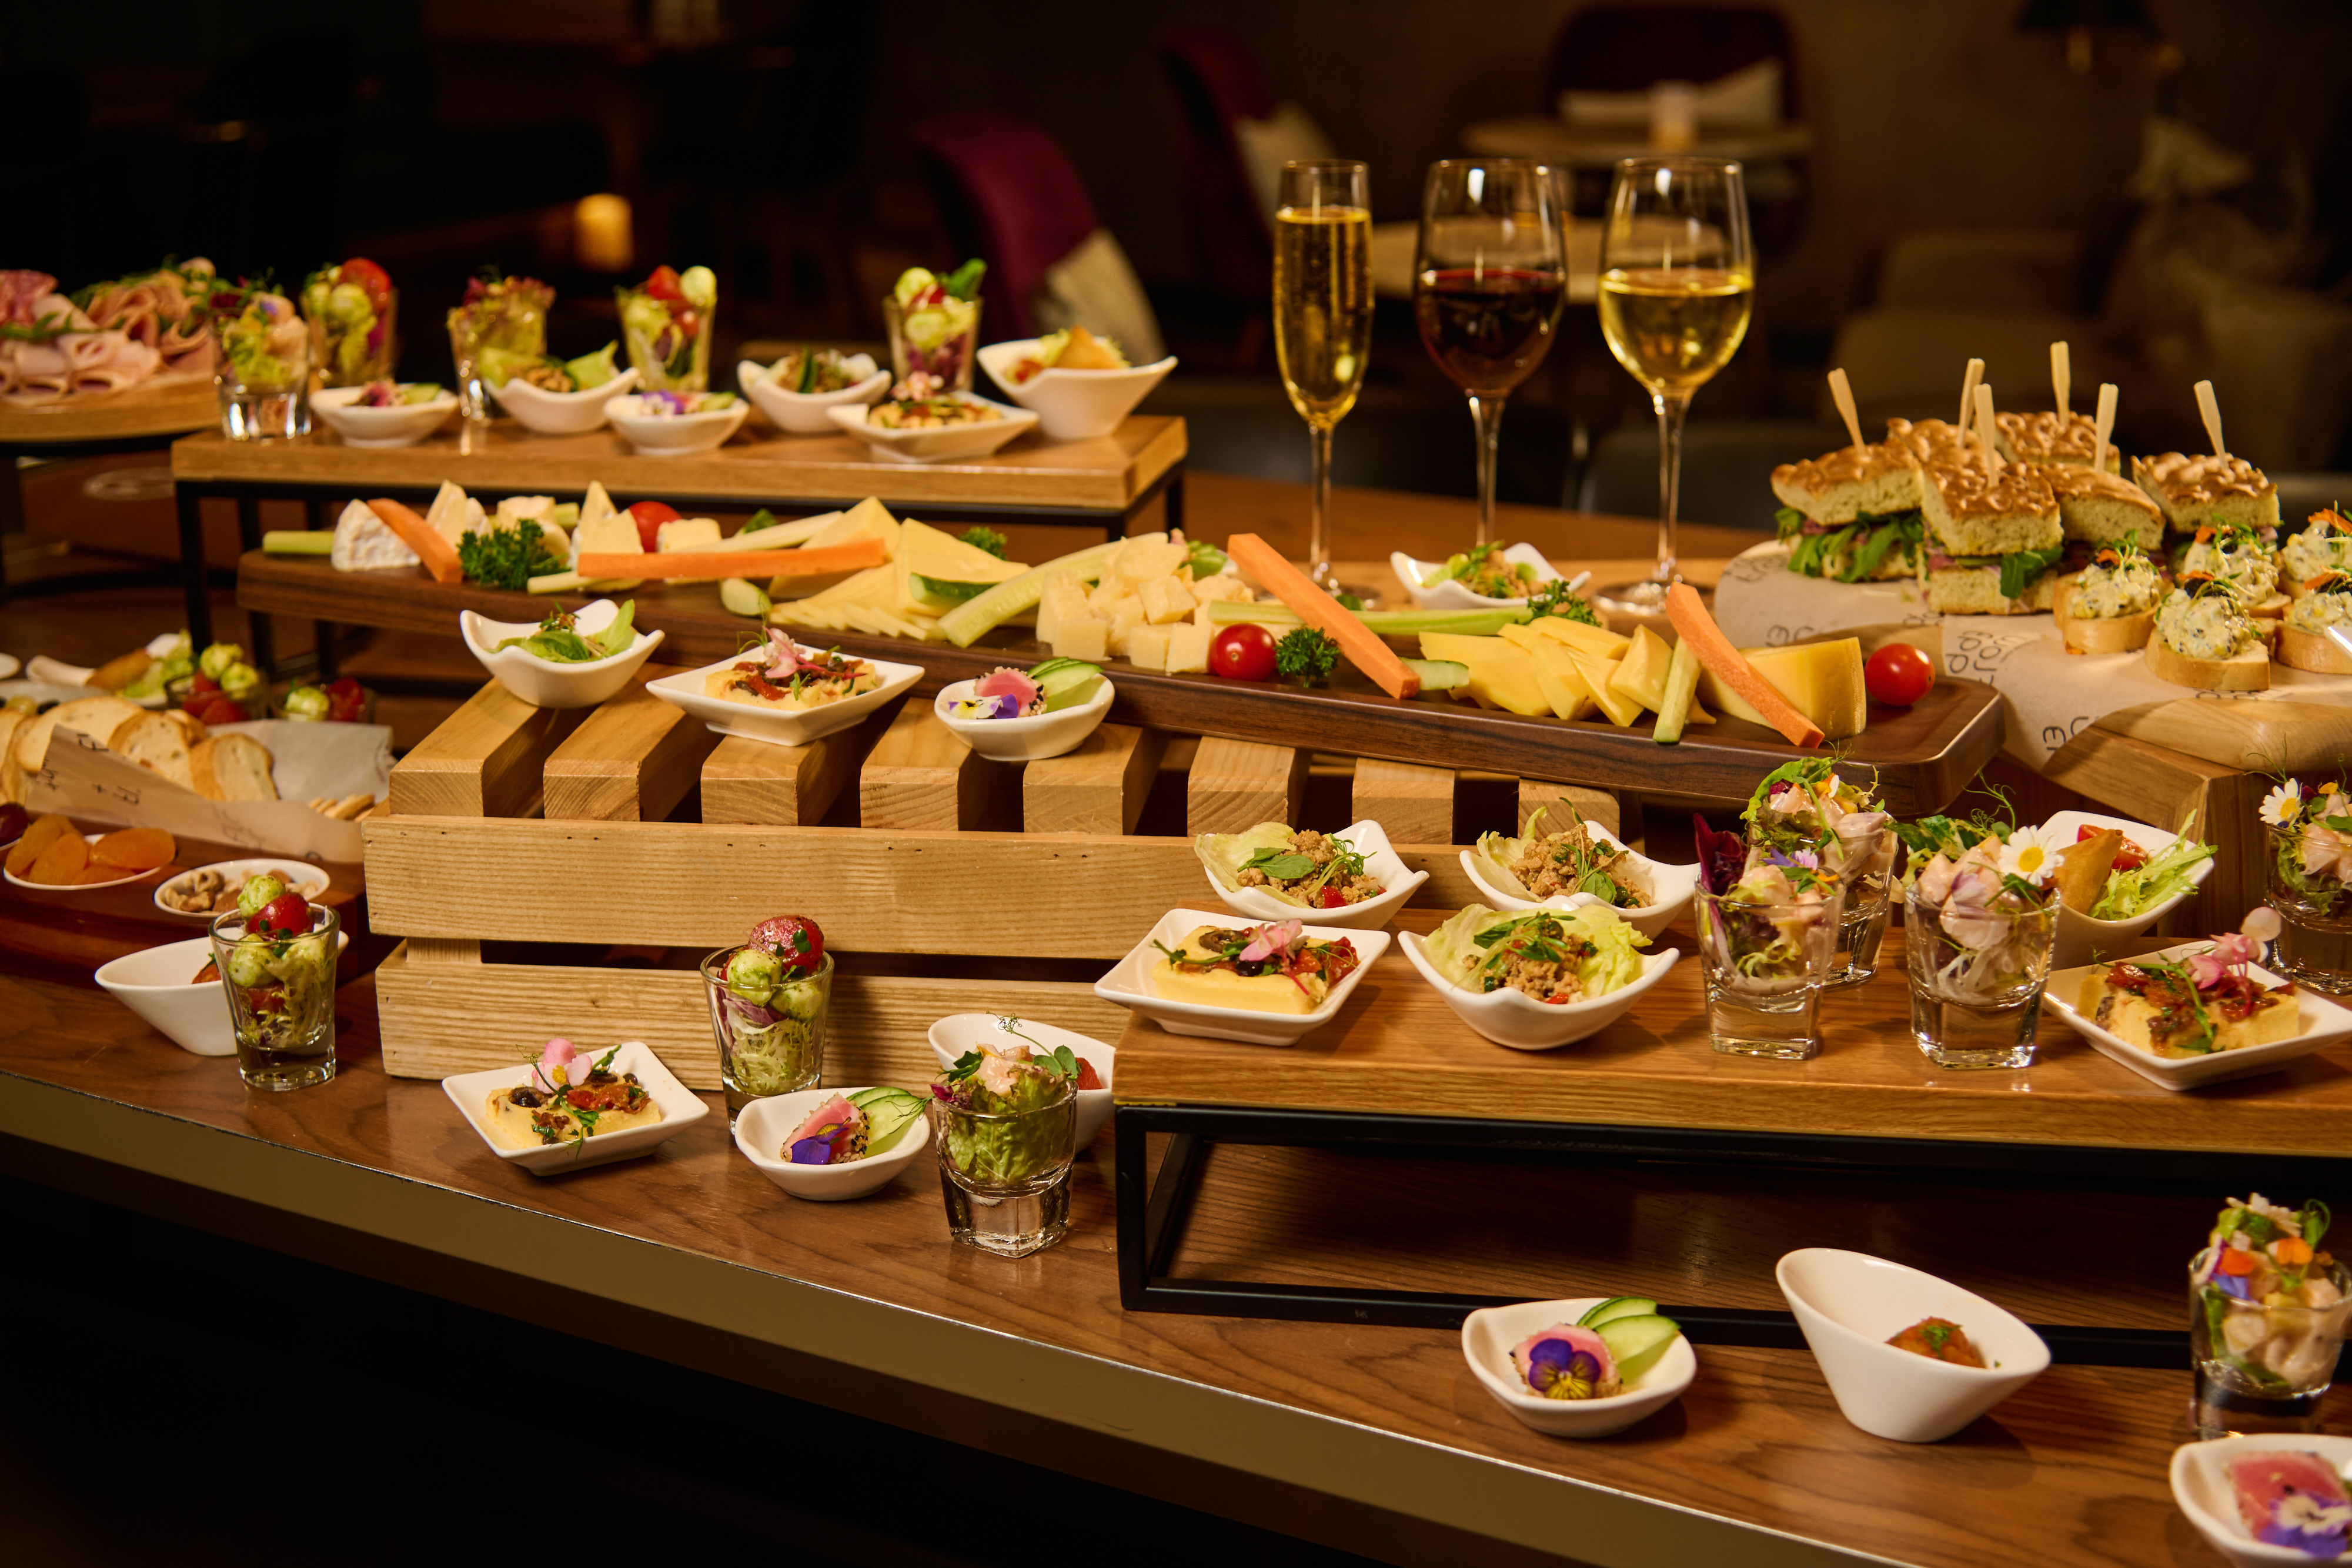 complimentary canapes happy hour at Ebb & Flow